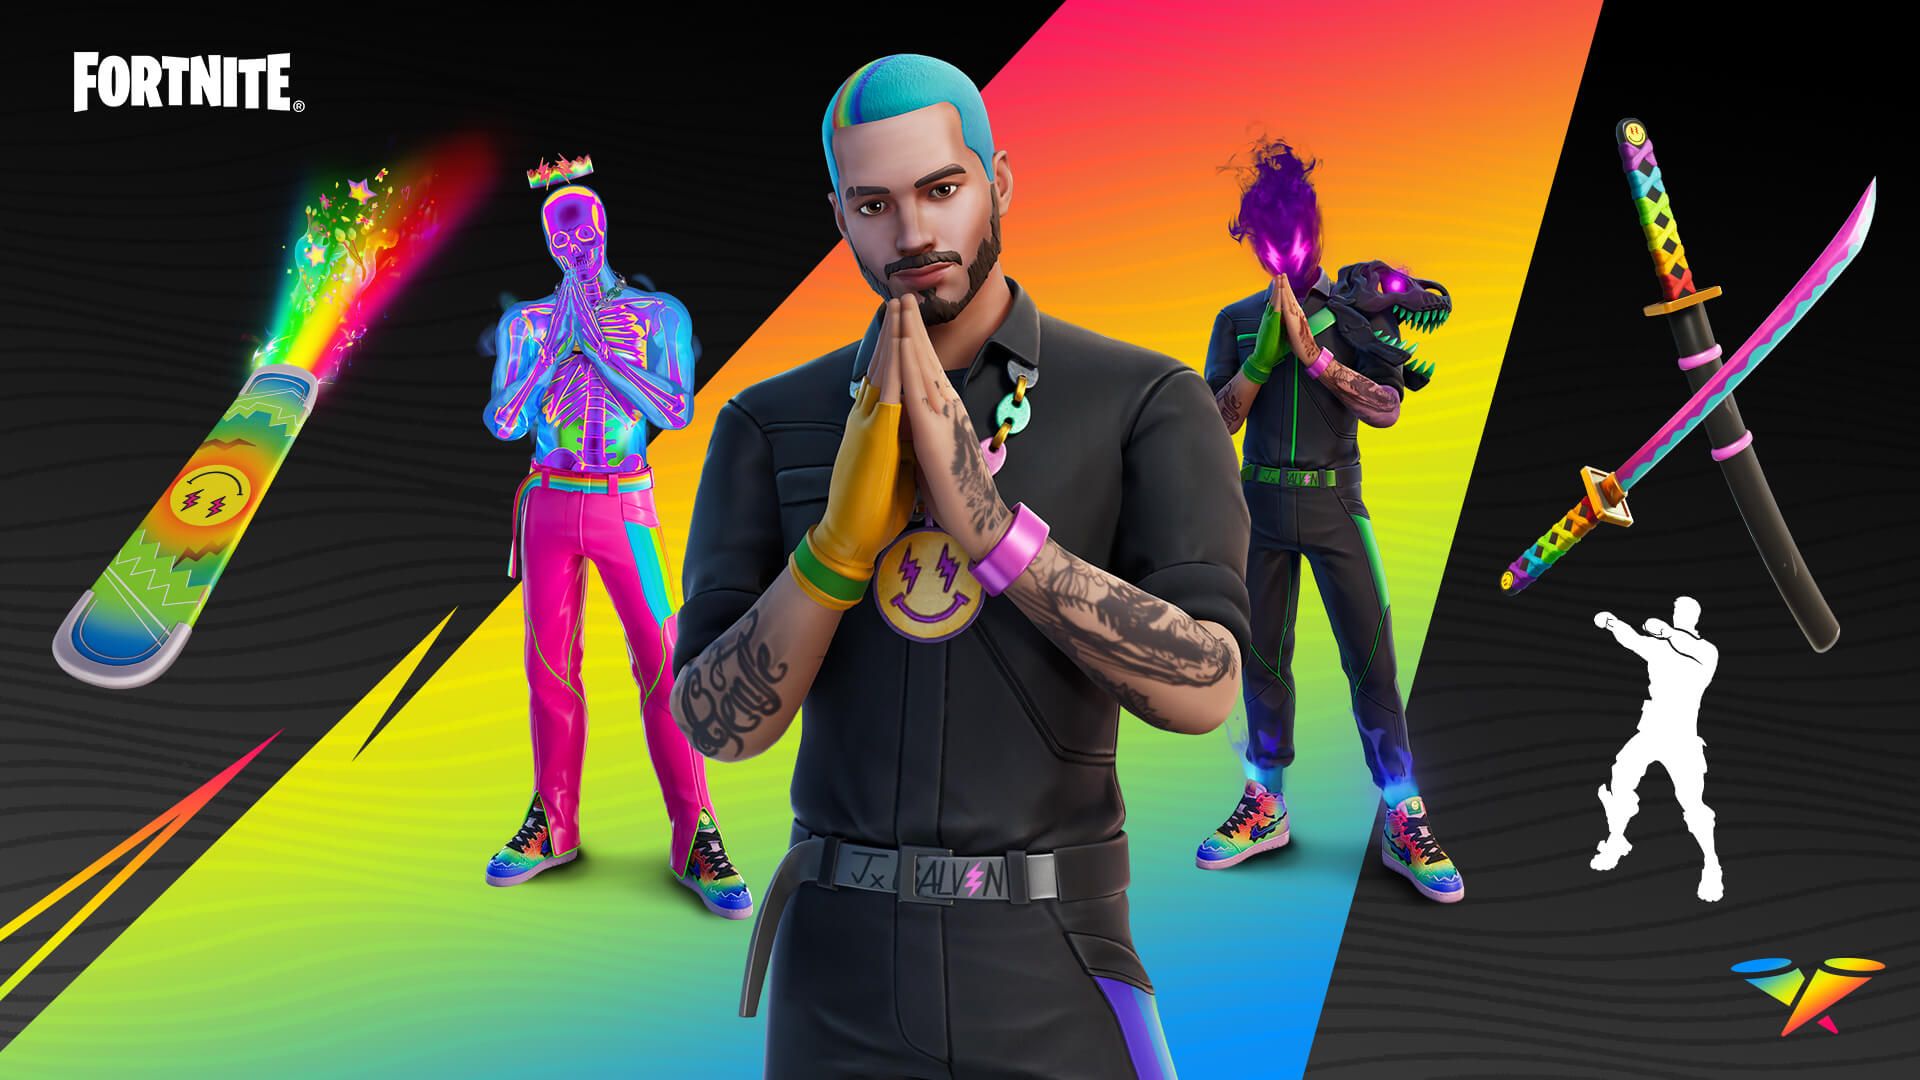 New J Balvin Fortnite Icon Series Bundle & Duos Cup (Free skin)